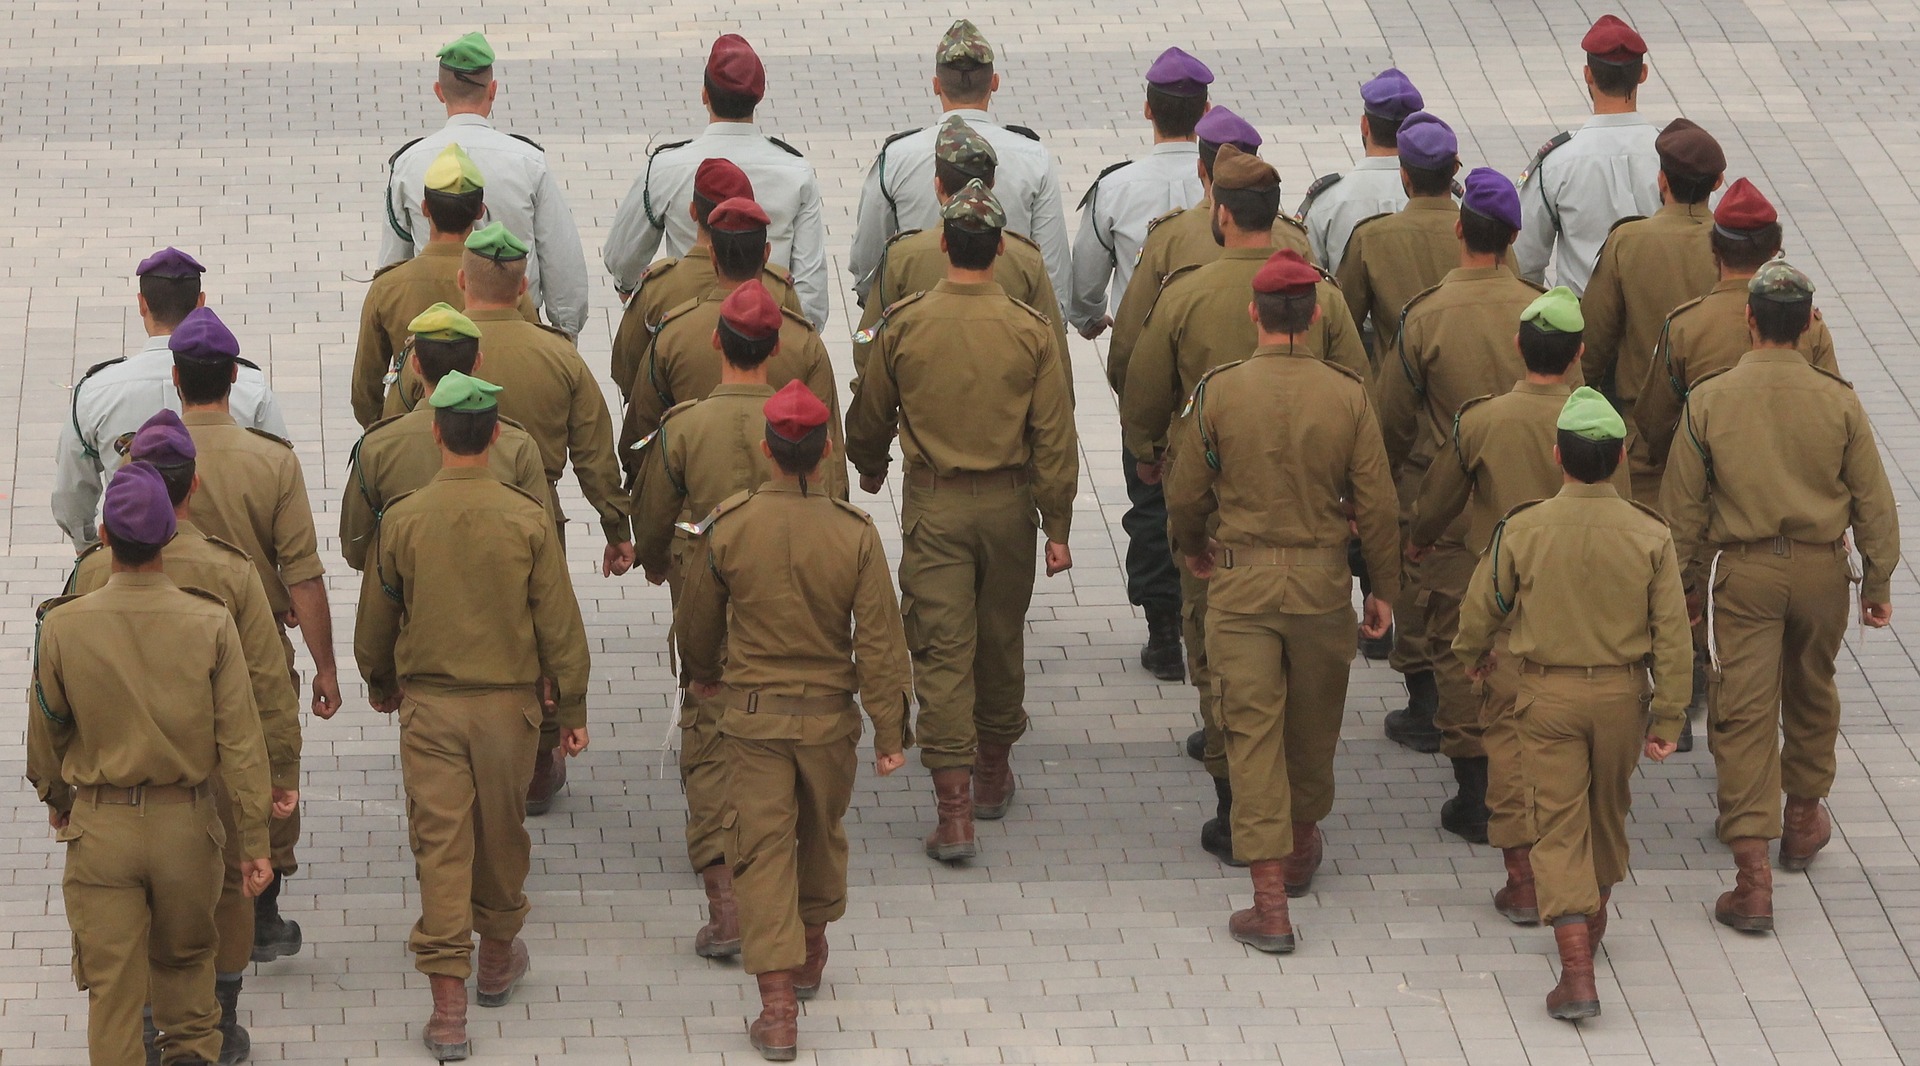 Yom HaZikaron and Its Significance in Israel